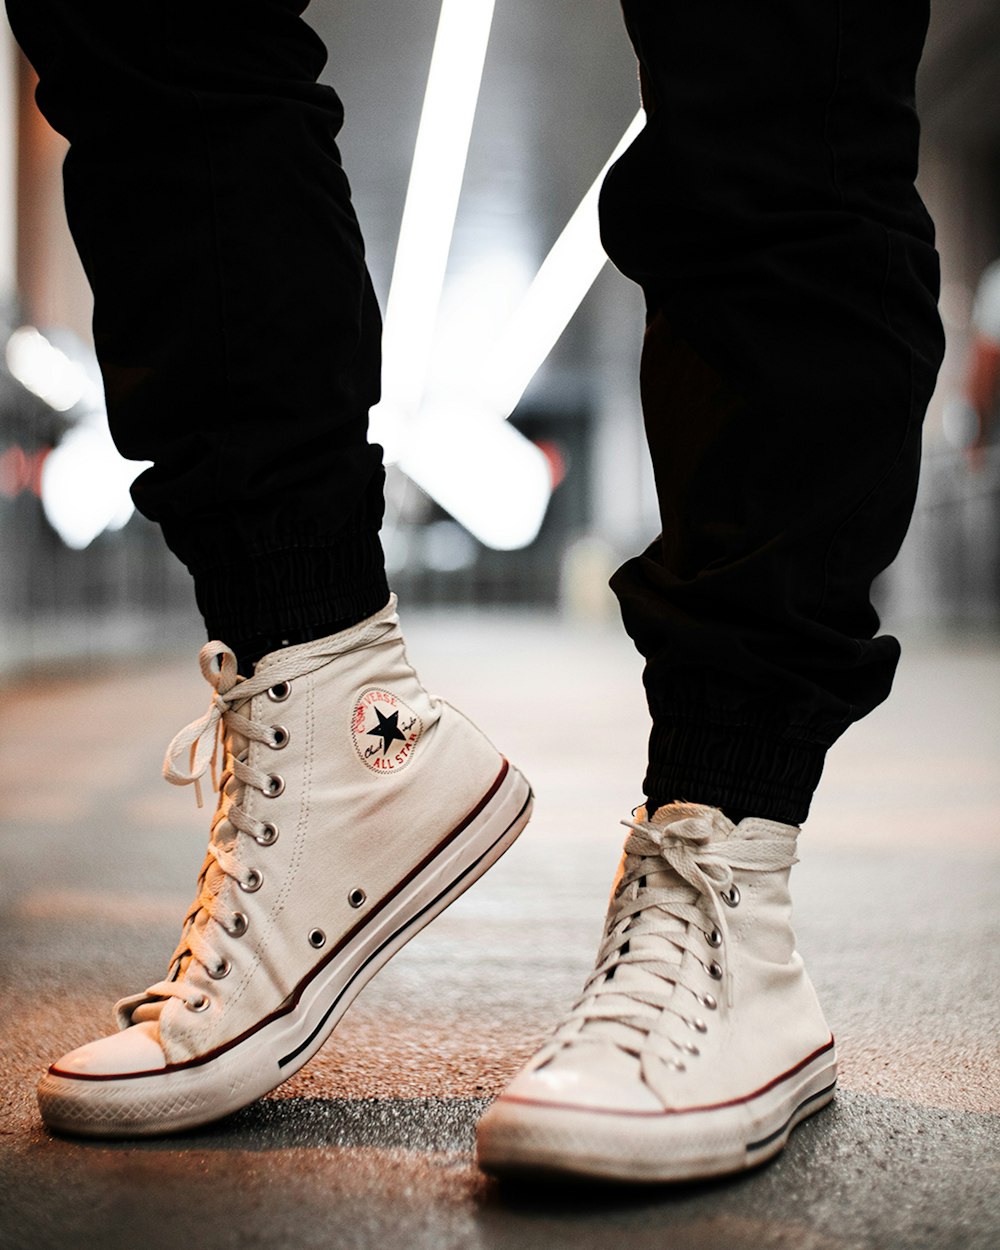 person in black pants wearing white converse all star high top sneakers  photo – Free Style Image on Unsplash